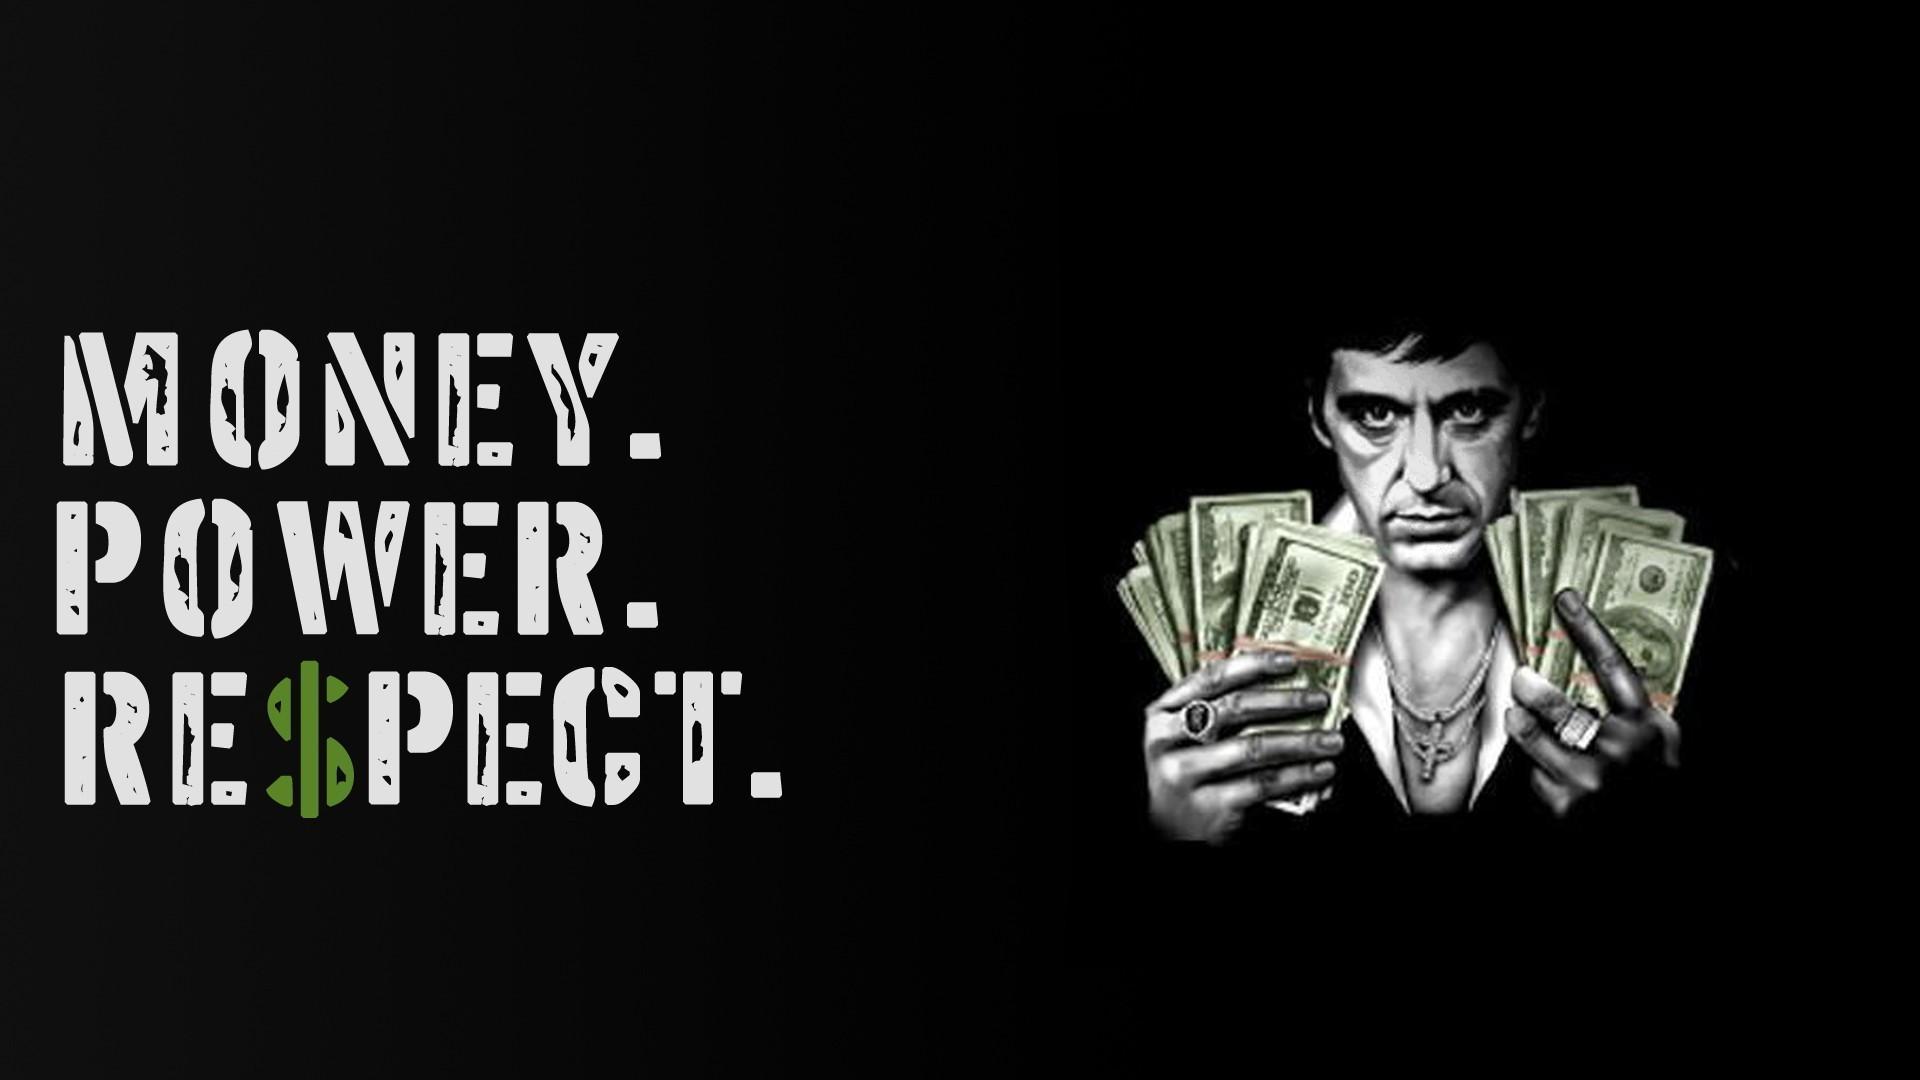 23681 scarface wallpapers for android, scarface wallpapers